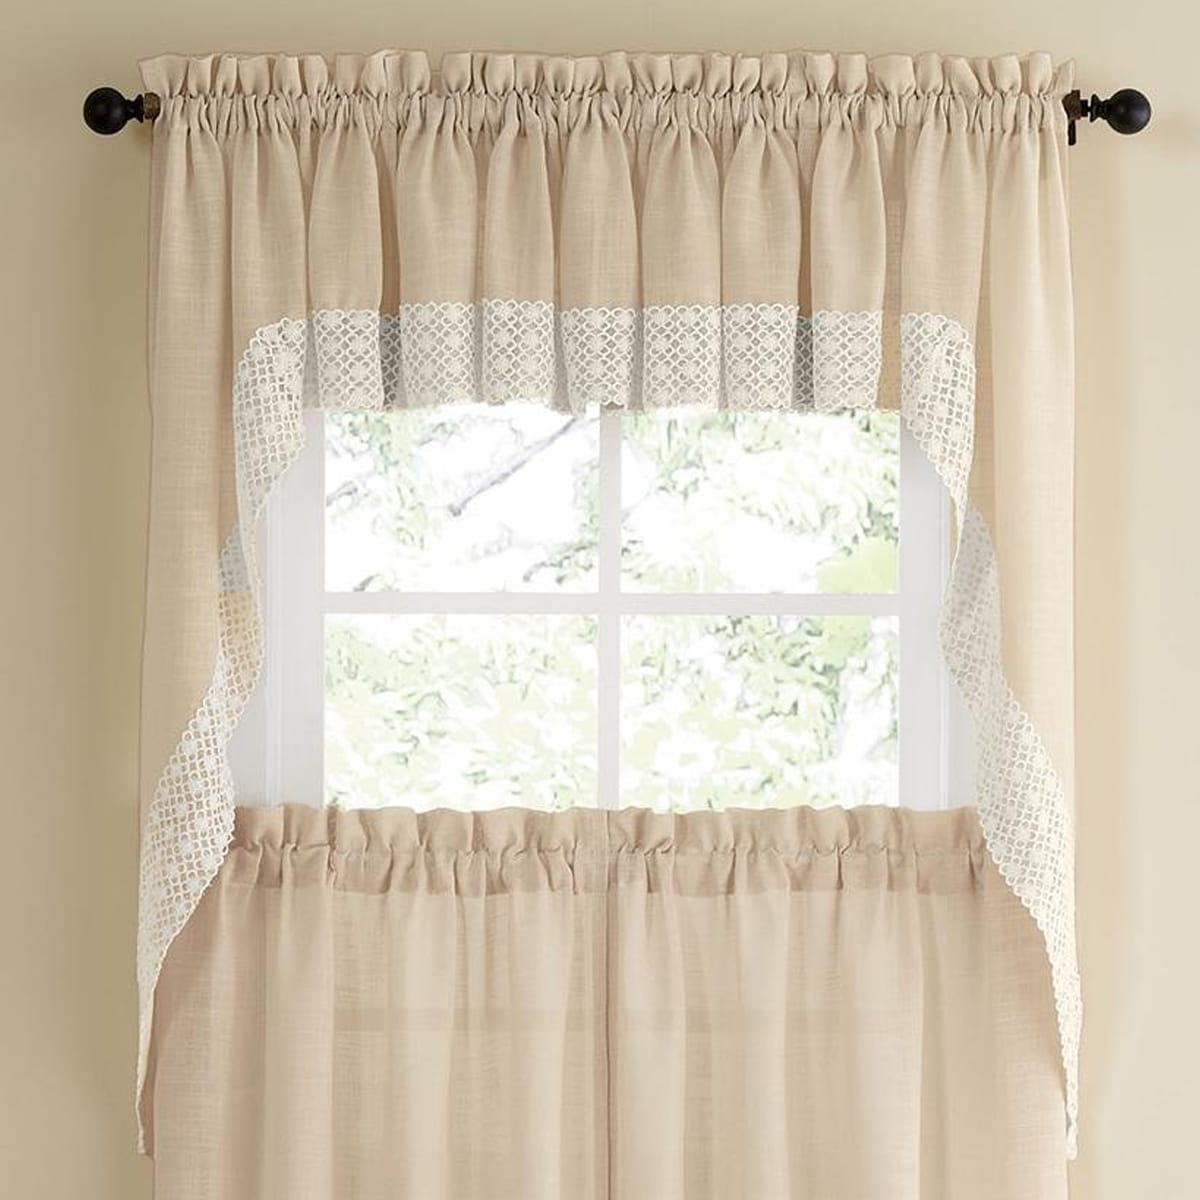 Shop French Vanilla Country Style Curtain Parts With White Daisy